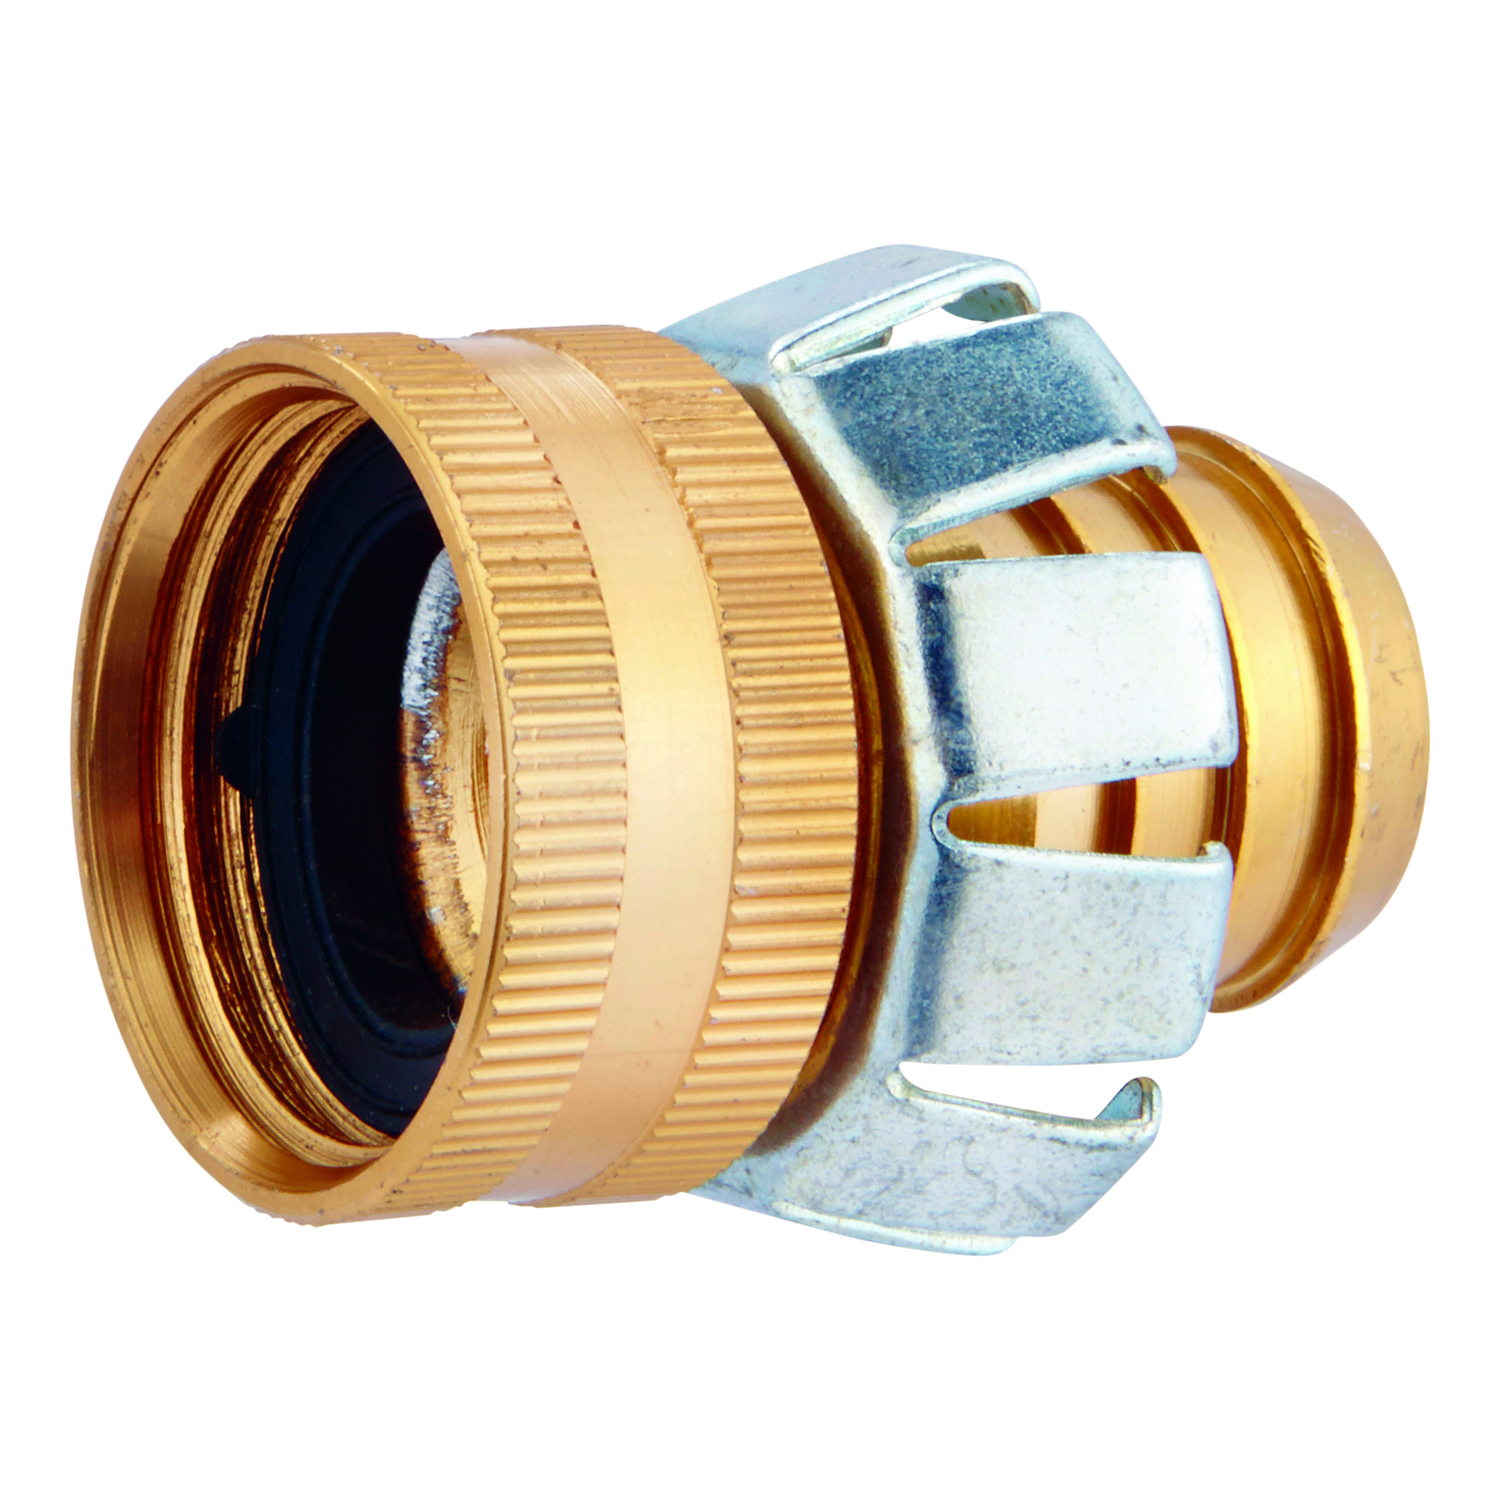 Ace 3/4 in. Metal Threaded Female Clinch Hose Mender Clamp